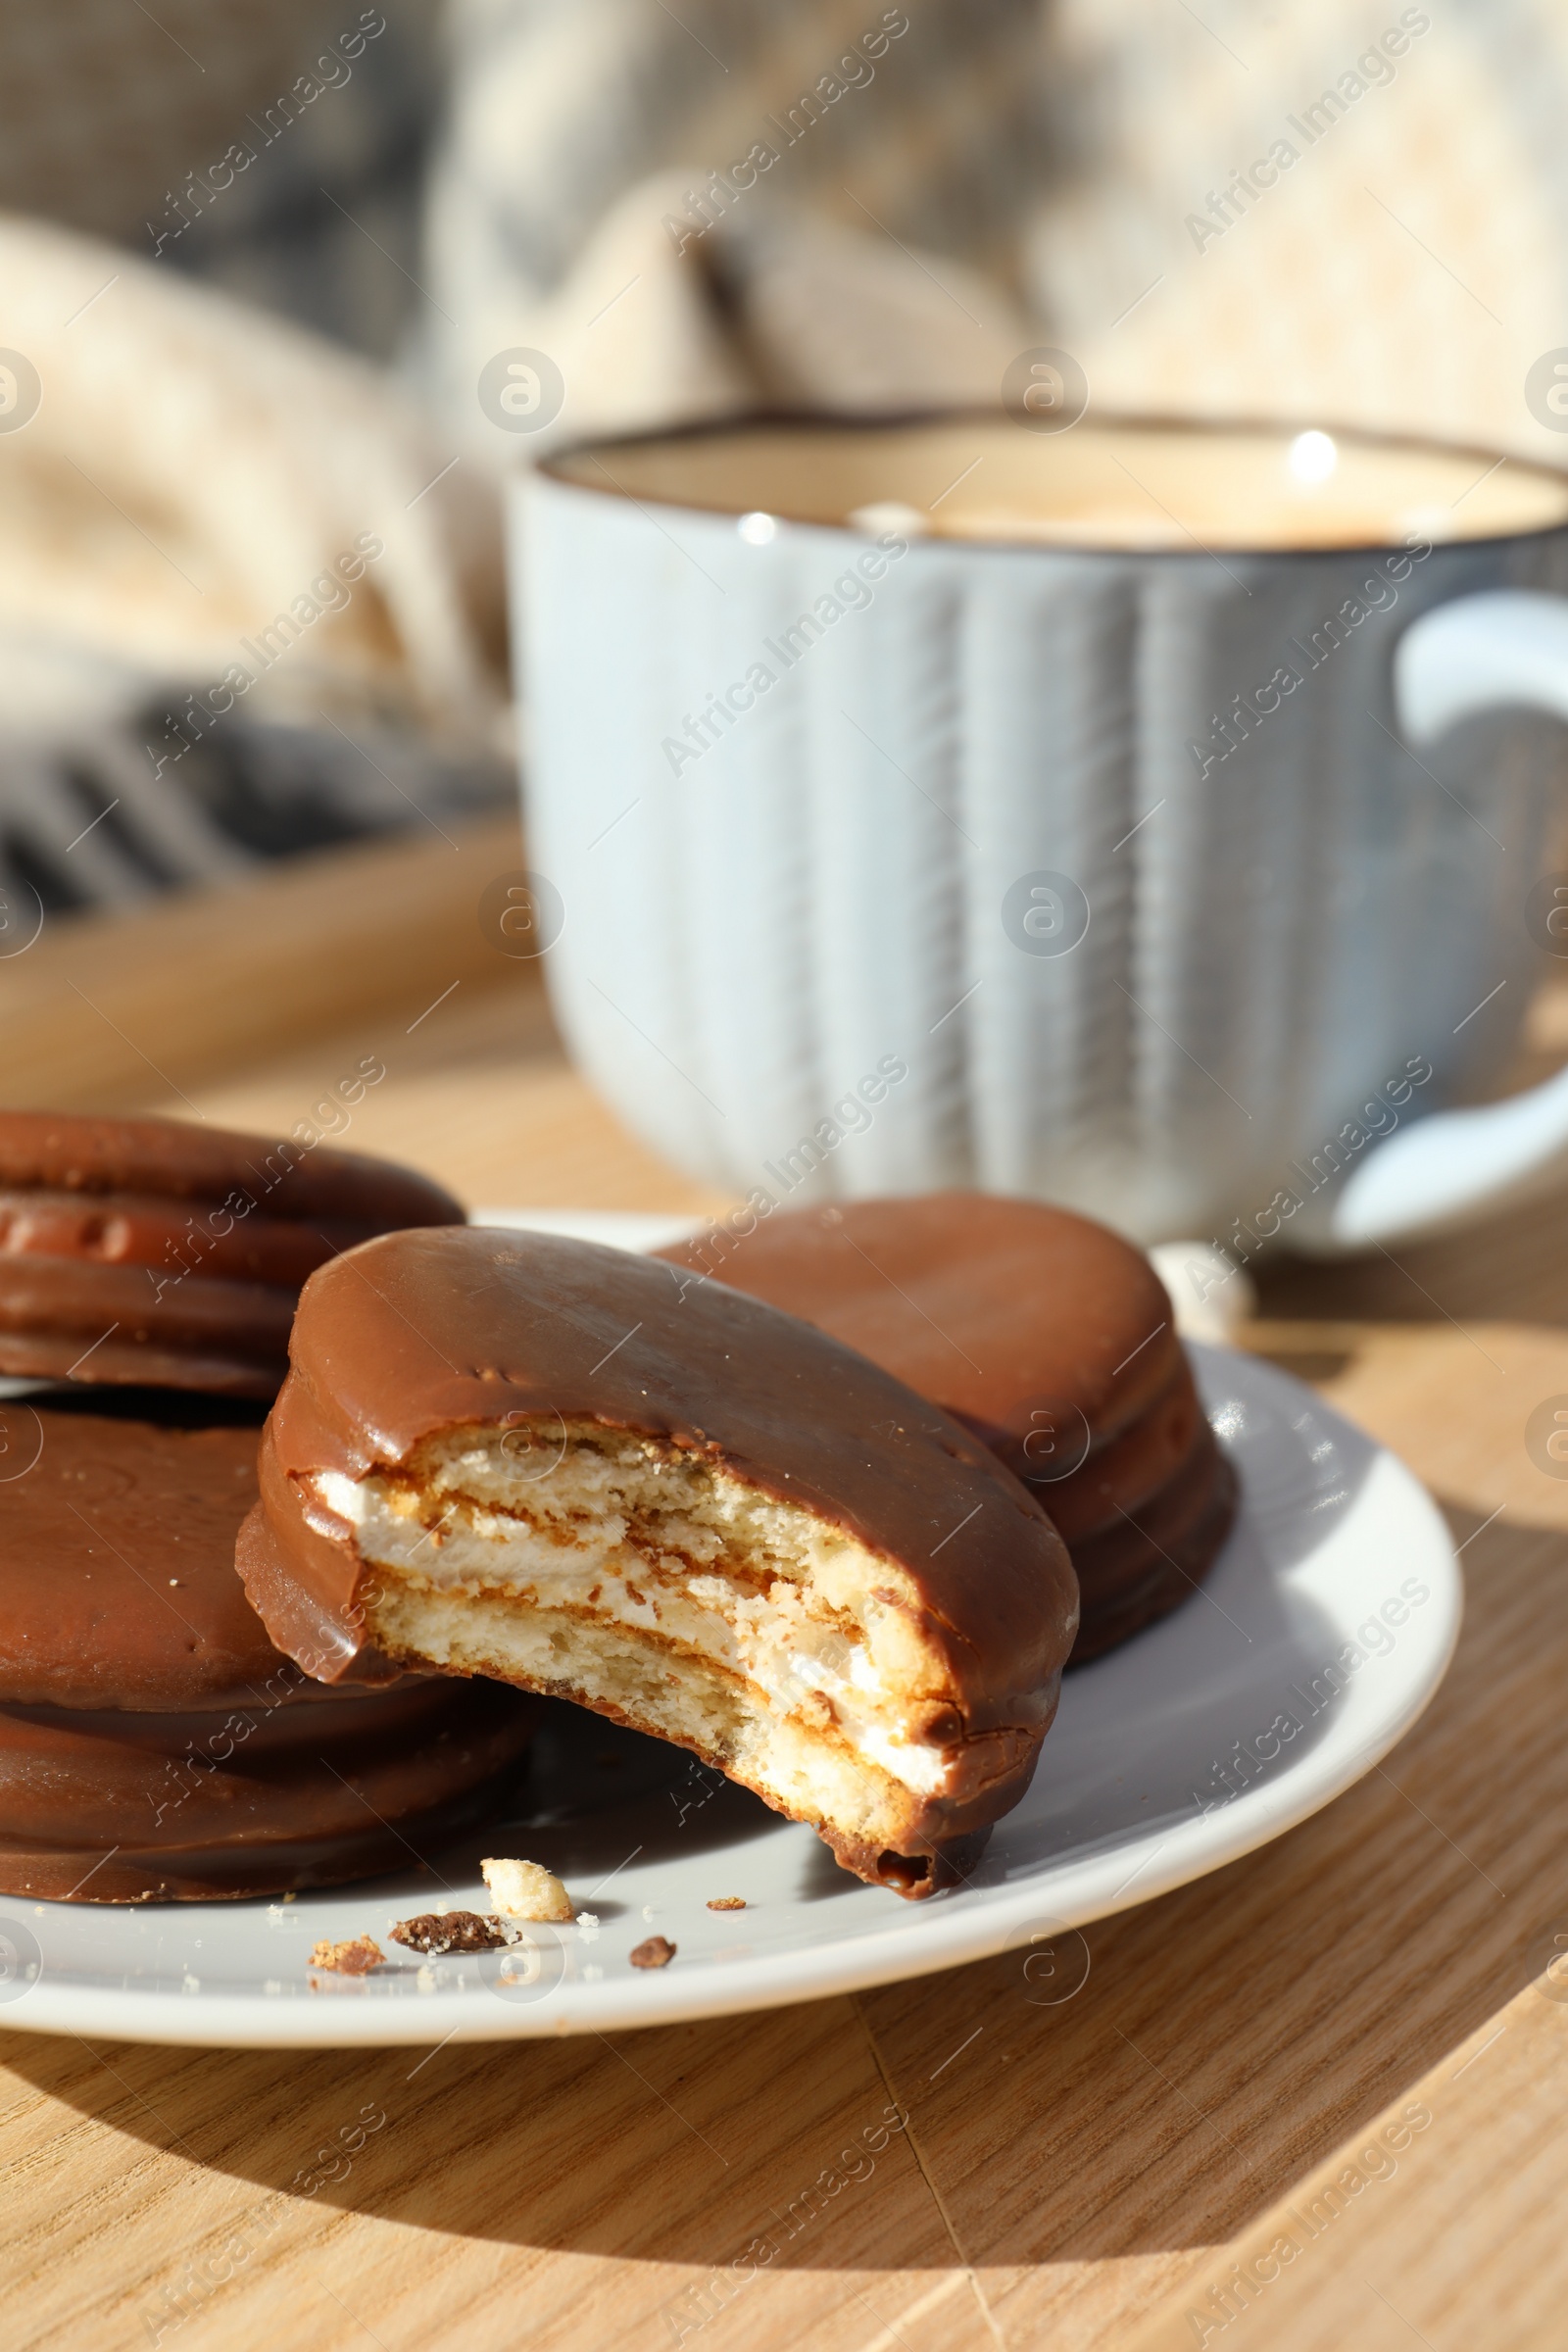 Photo of Tasty choco pies and cup of hot drink on wooden tray